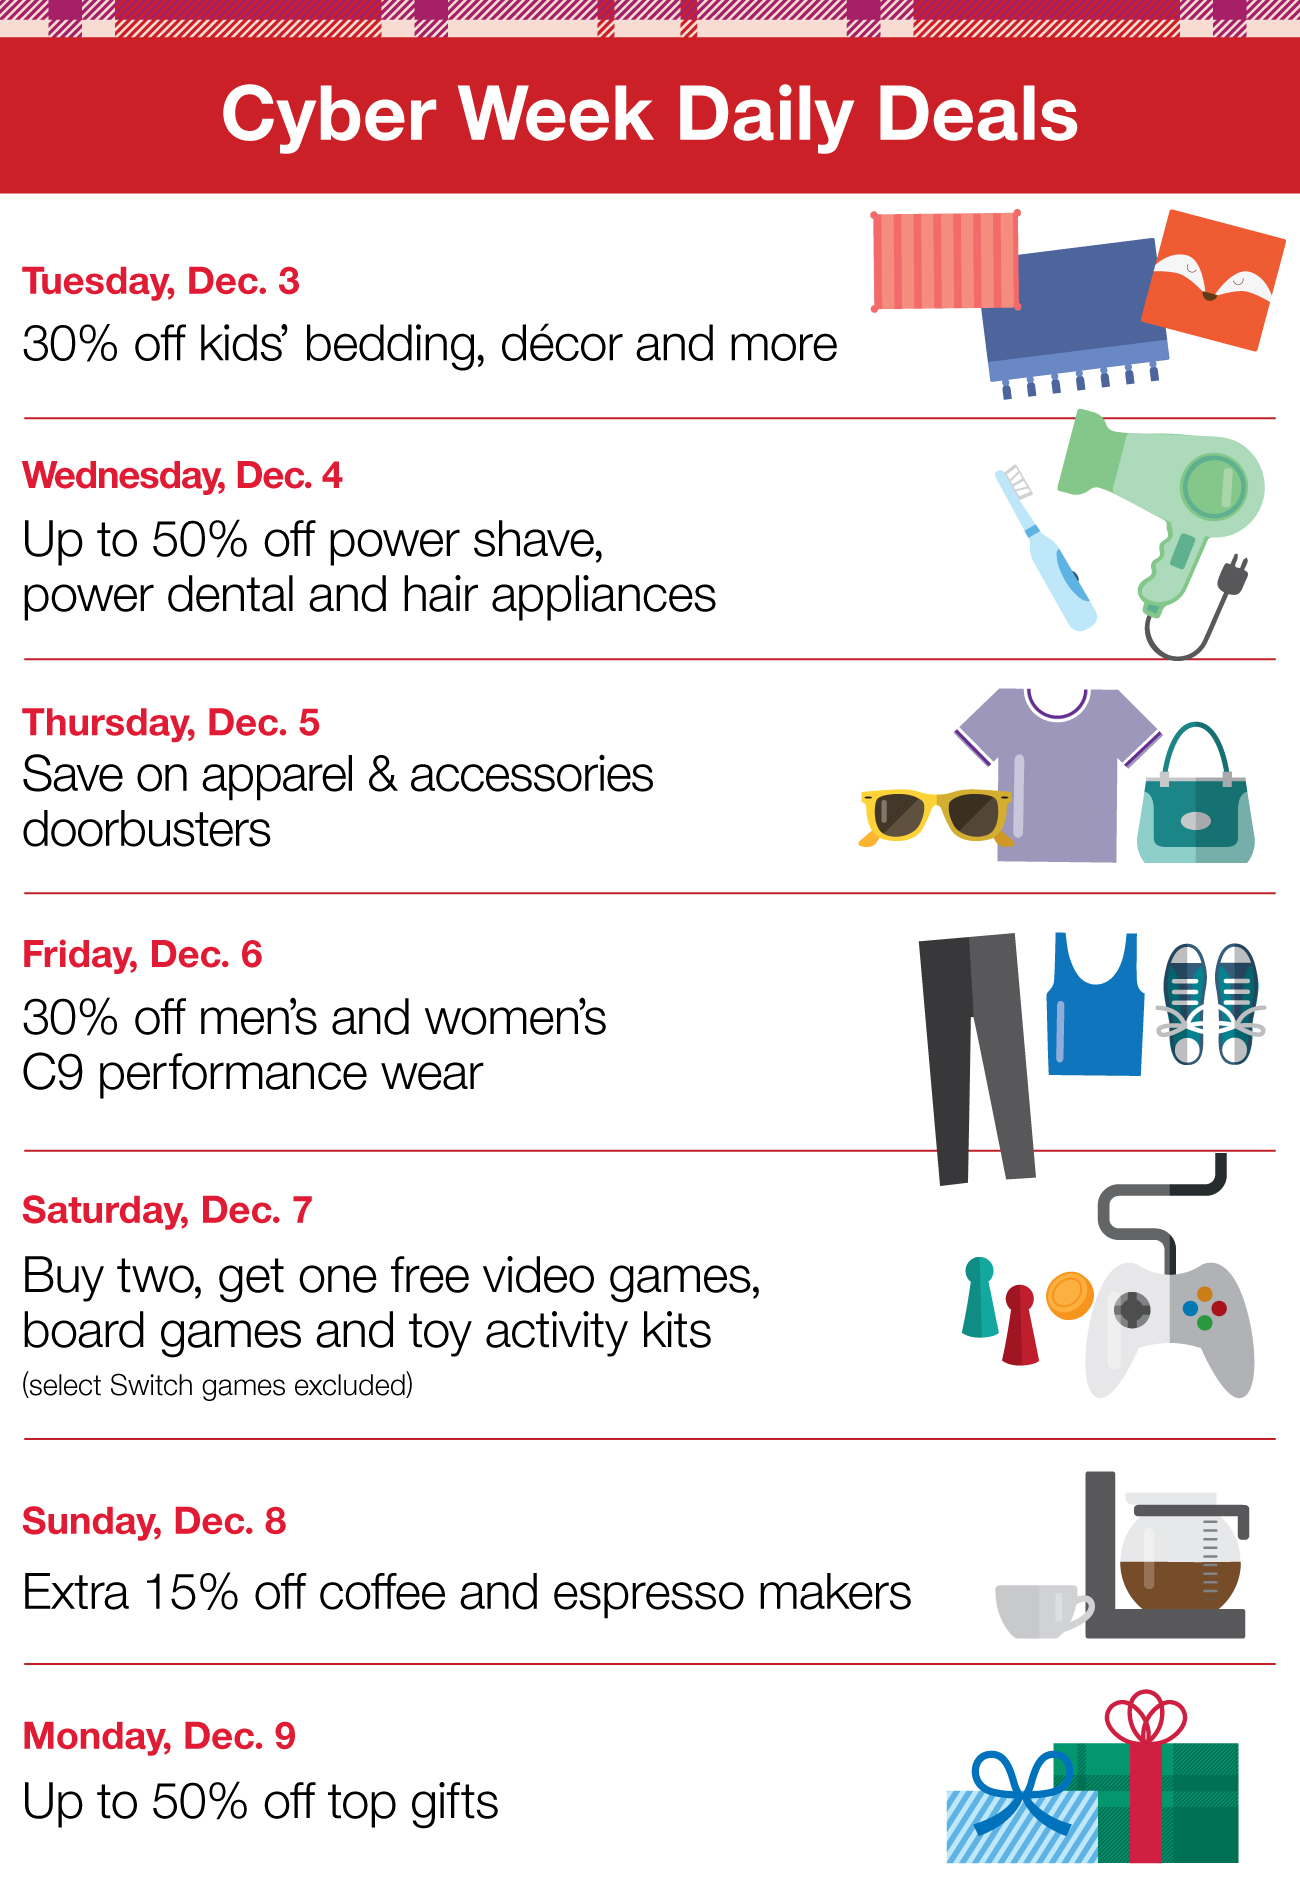 An infographic with a red plaid border and illustrations describing Target's Cyber Week Daily Deals